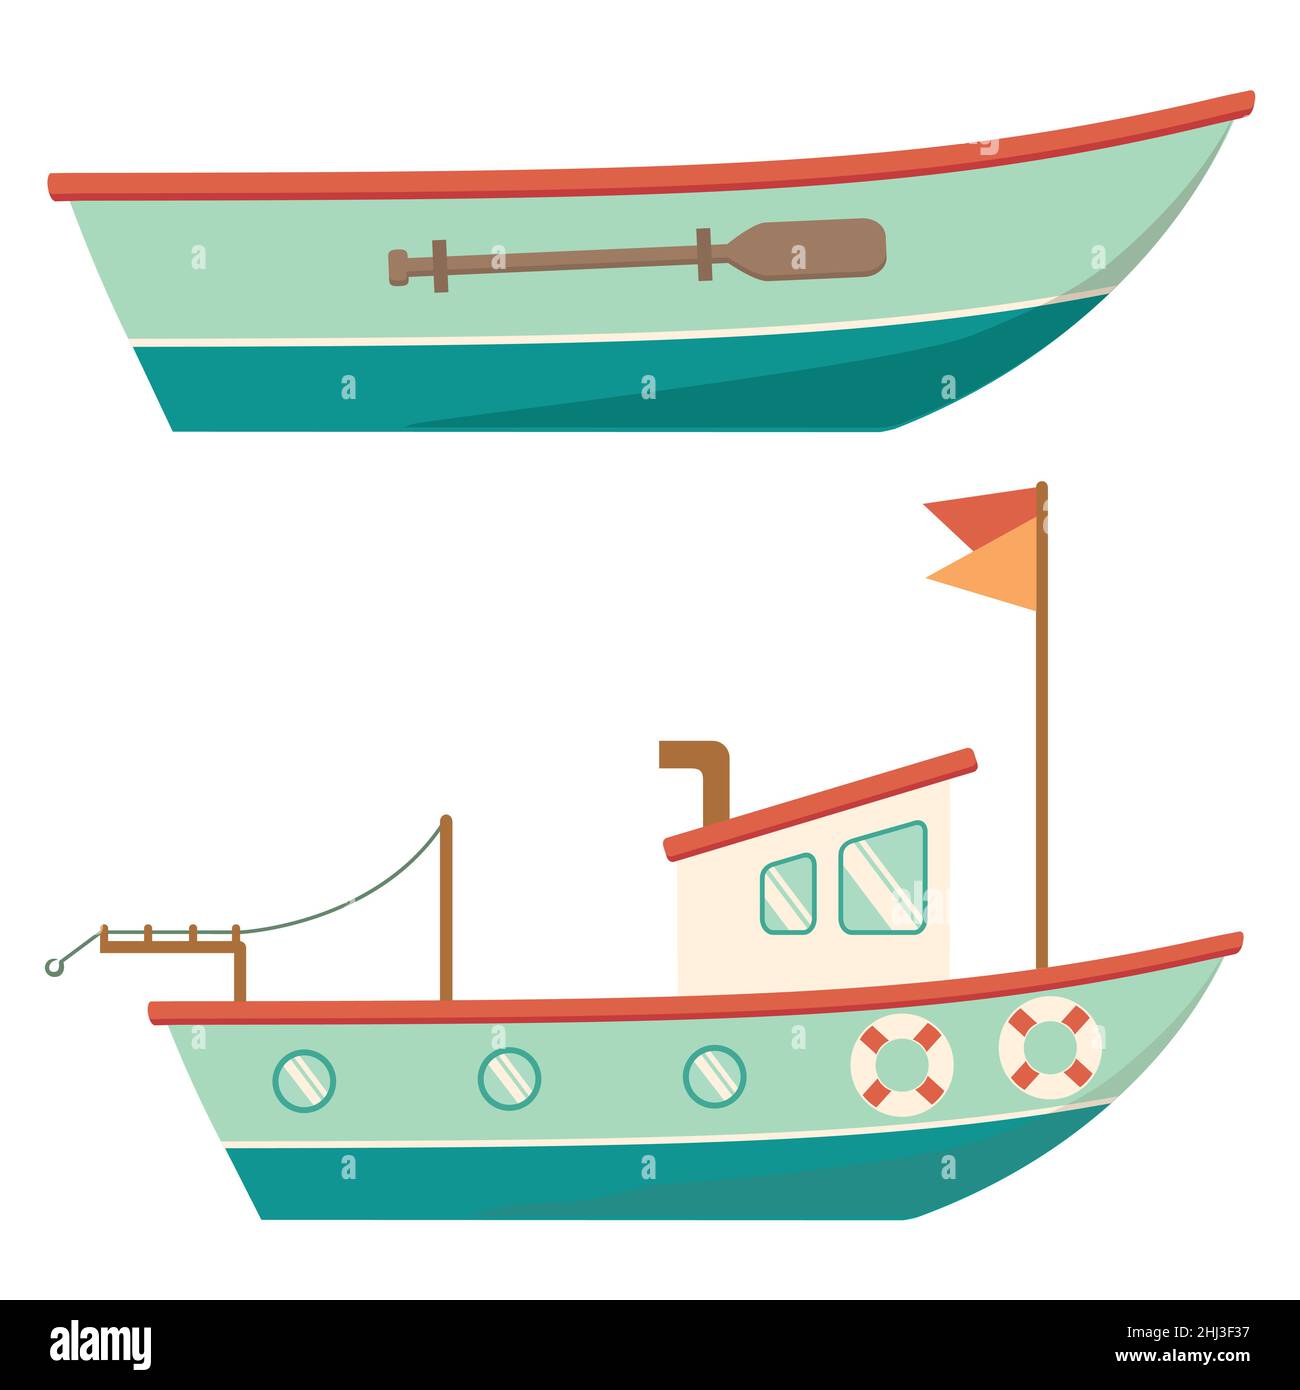 wooden boat side view vector illustration isolated on white background Stock Vector